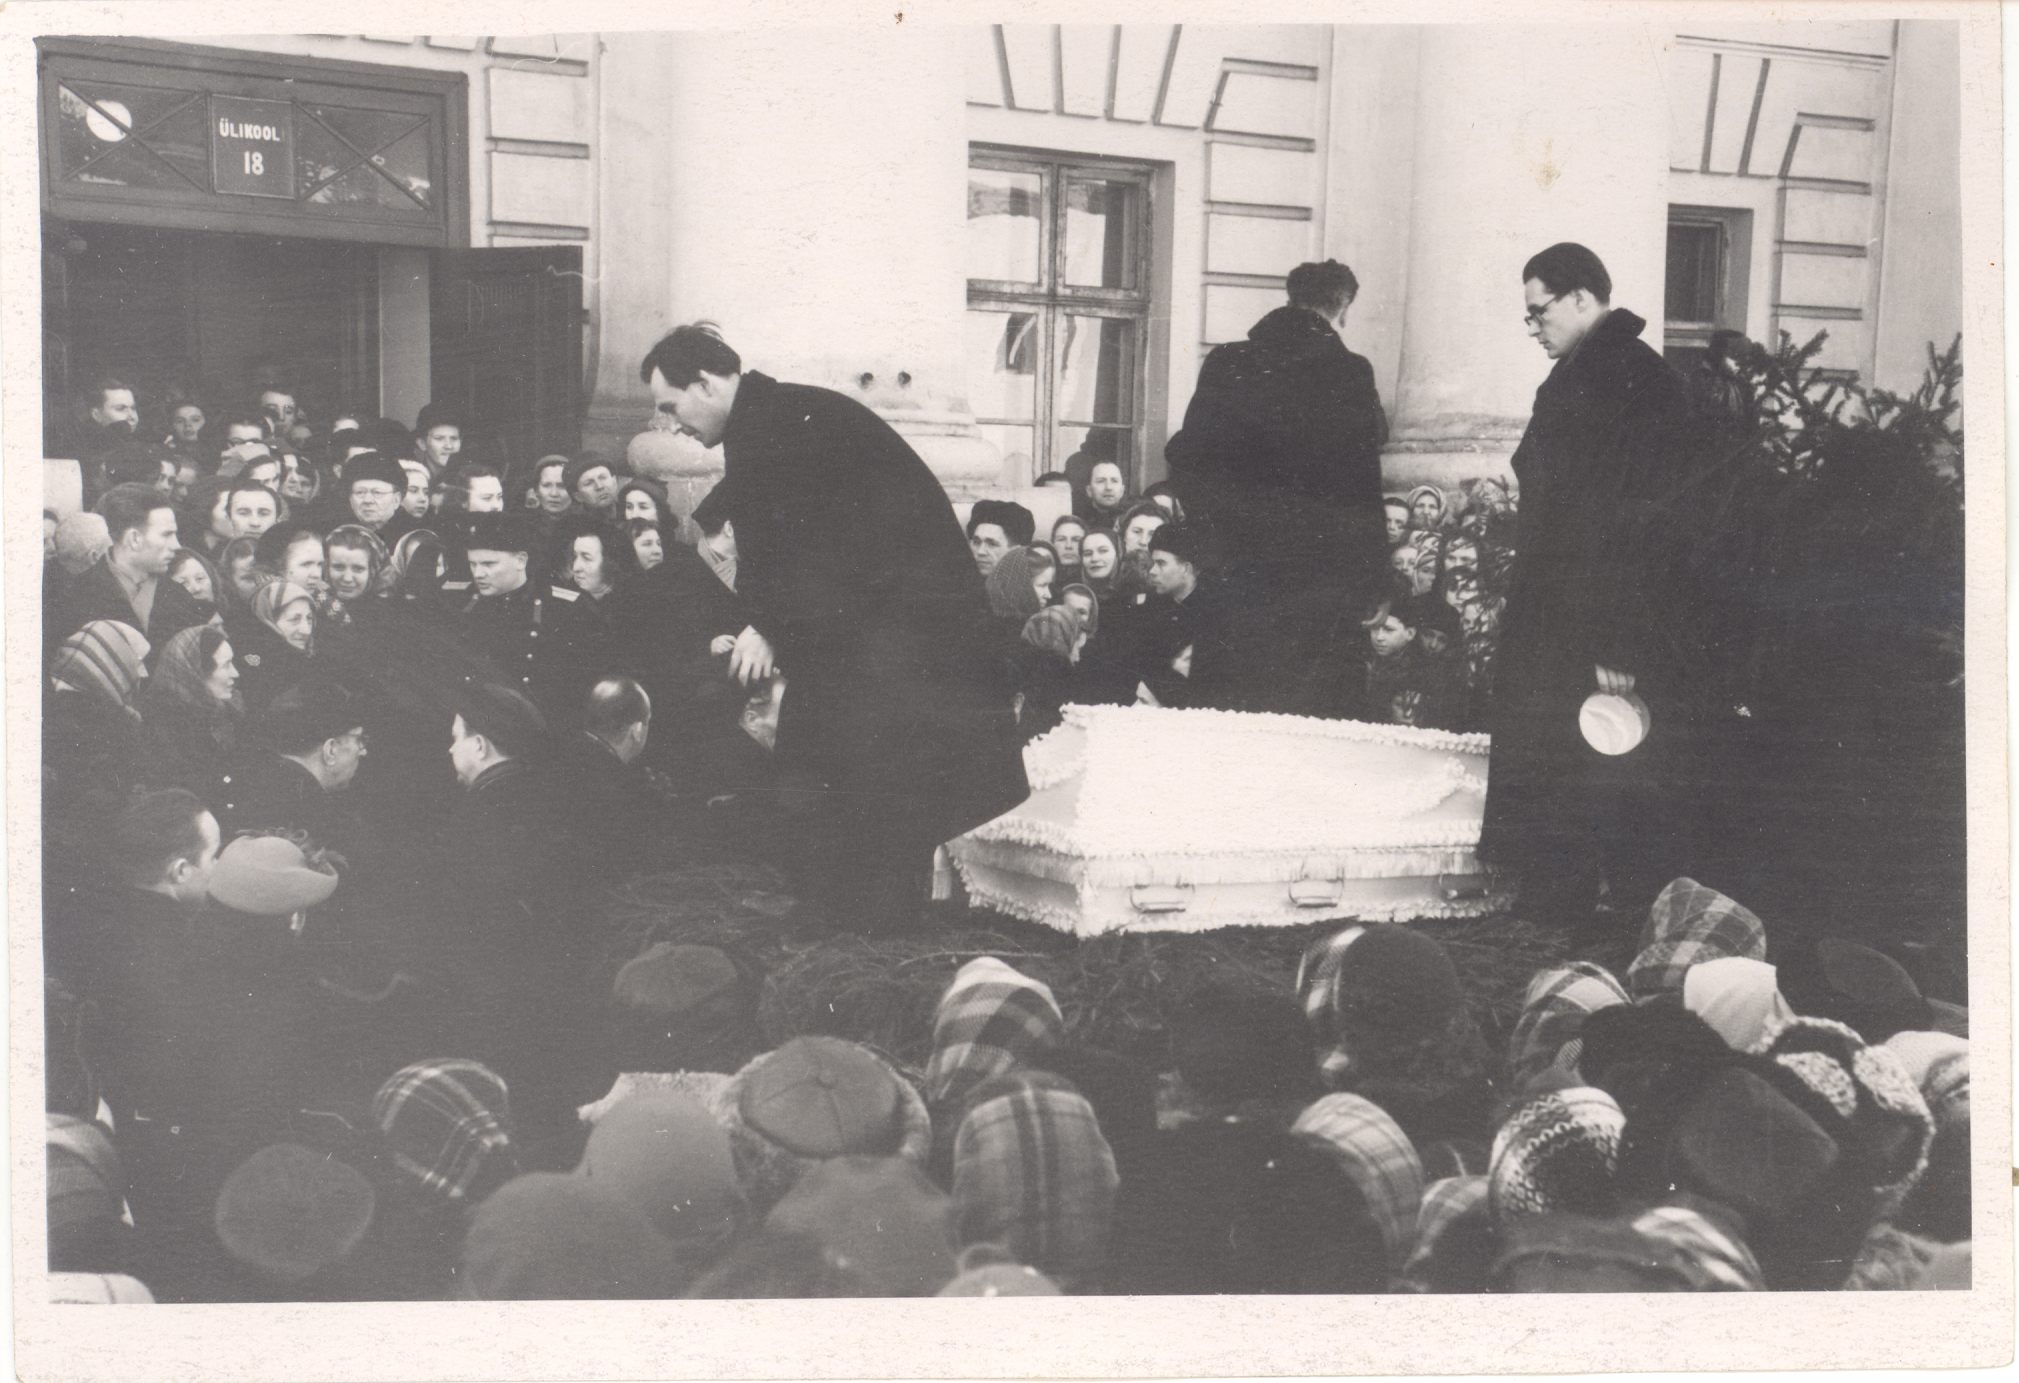 Bringing out the wound, Anna sludge from the main building of the University of Tartu 17.03.1957.